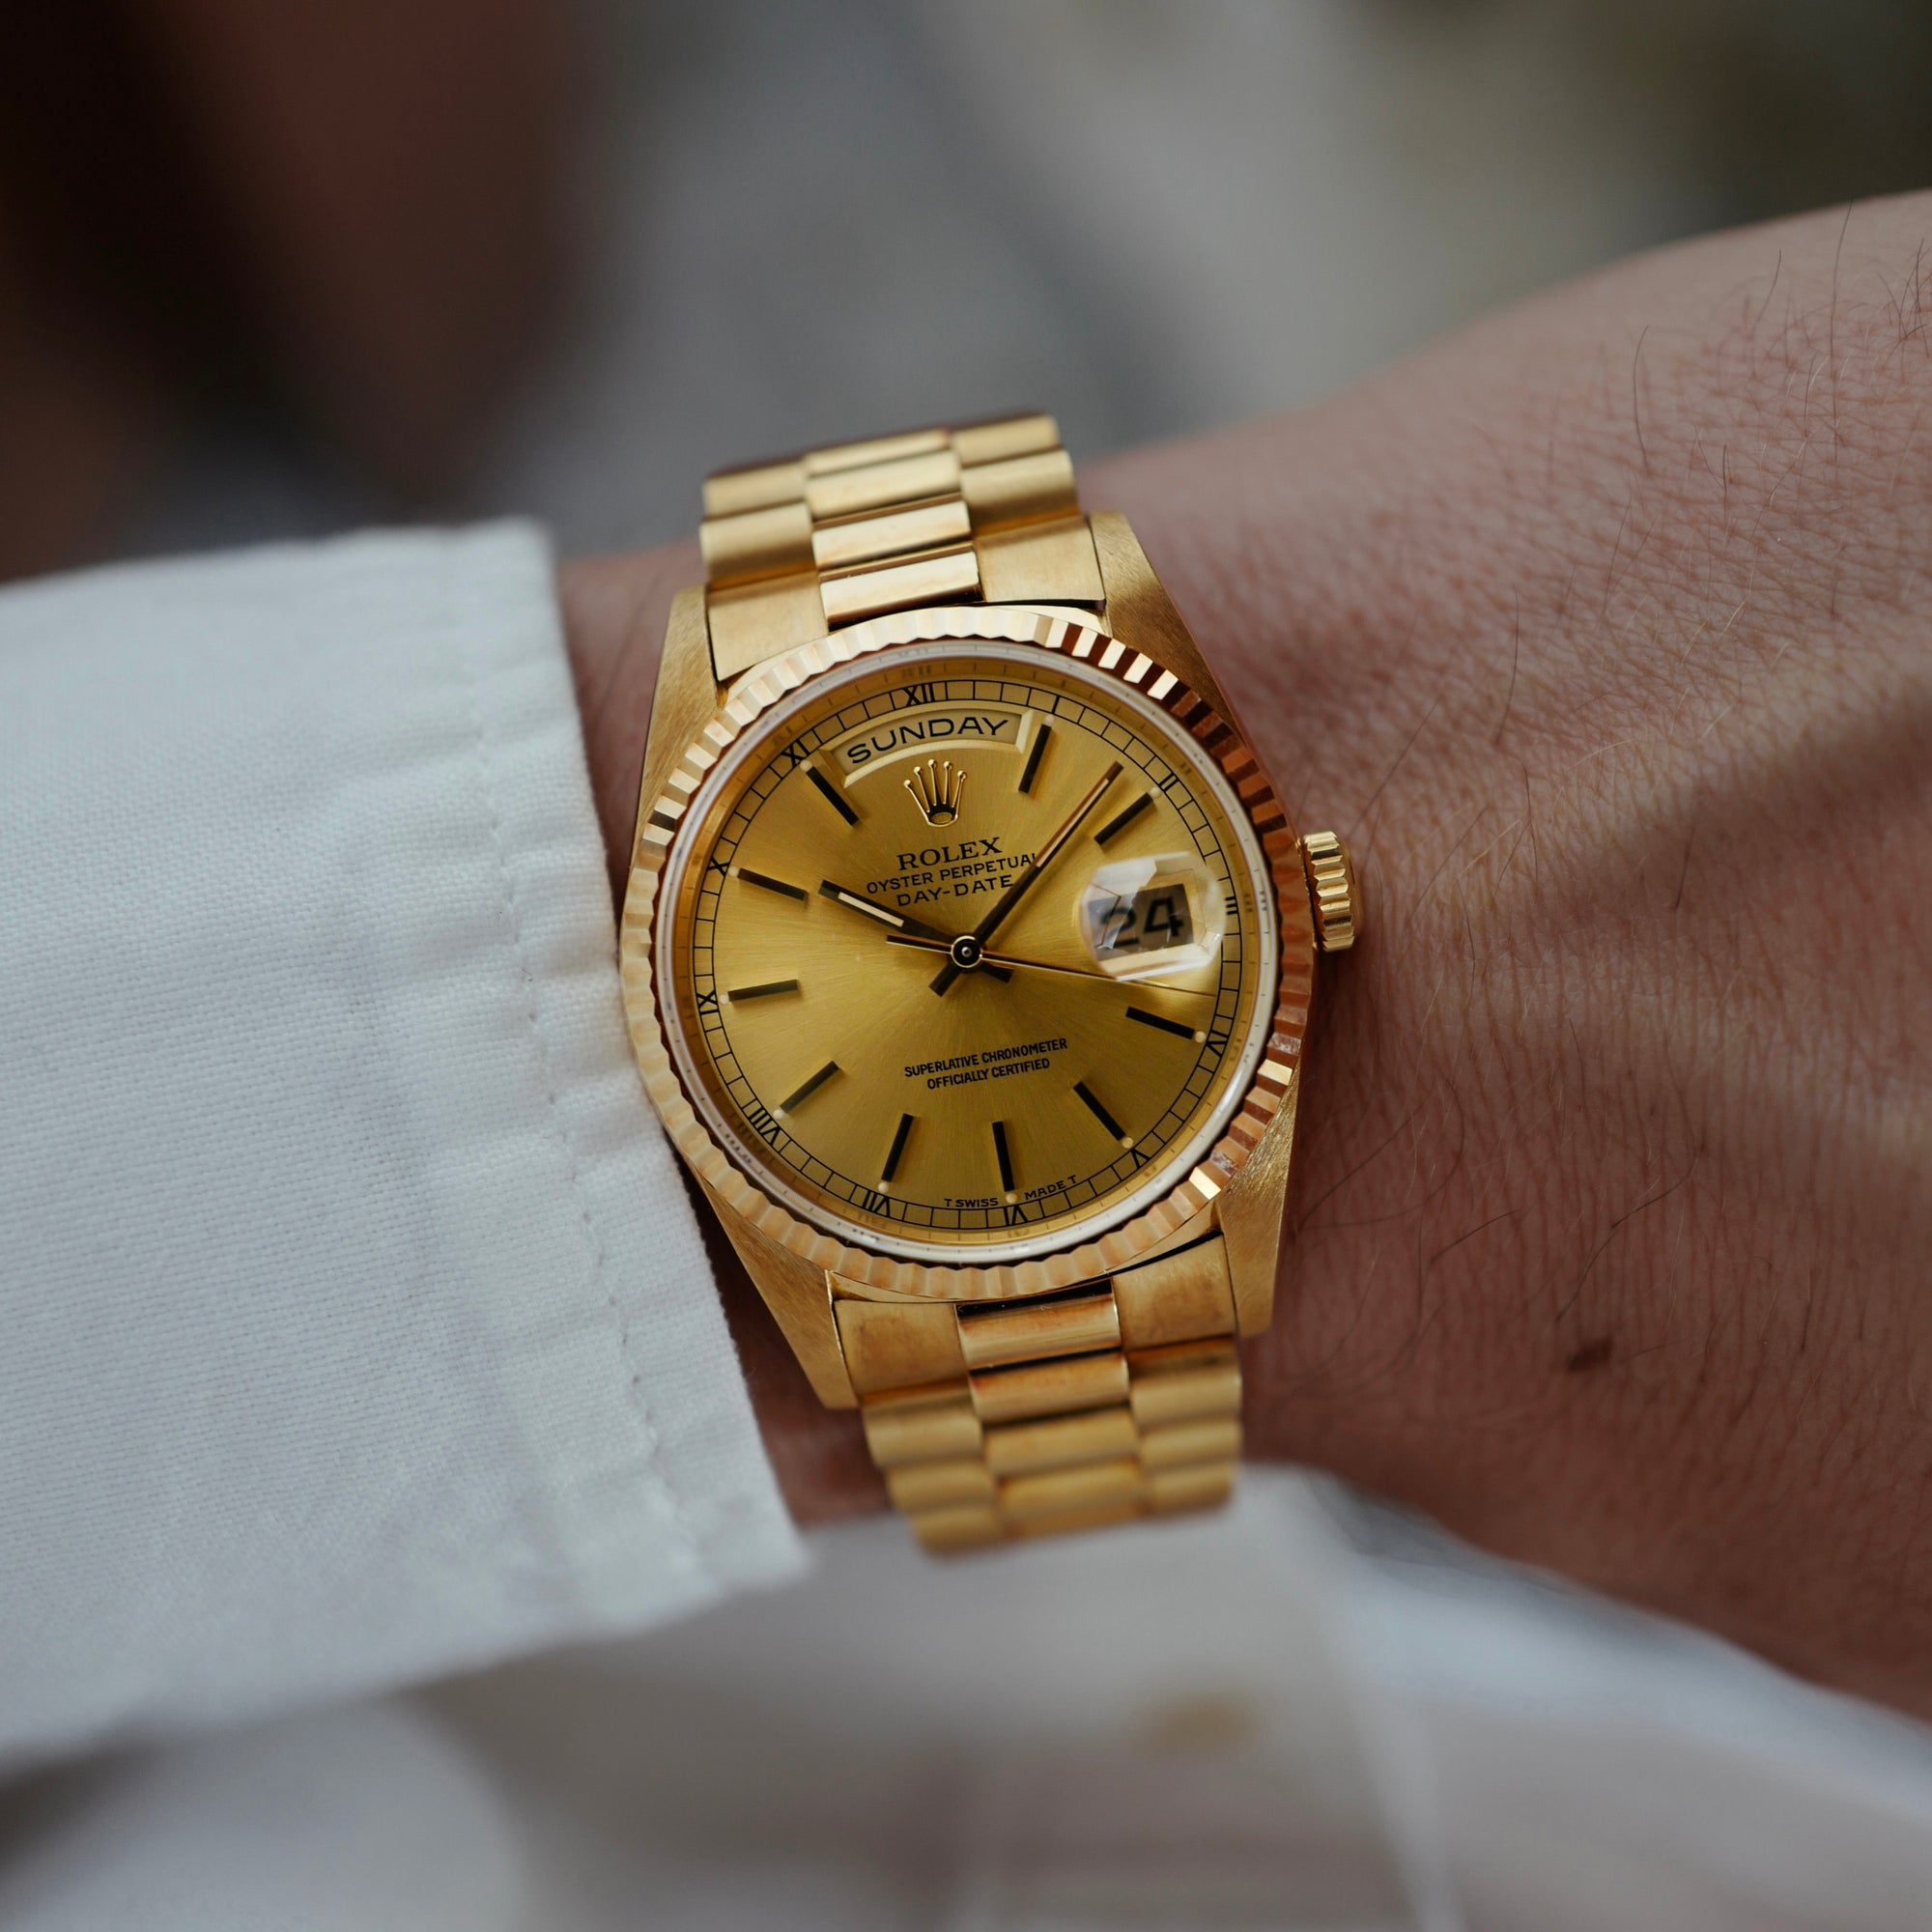 Rolex - Rolex Yellow Gold Day-Date Watch Ref. 18238, Like New Old Stock - The Keystone Watches